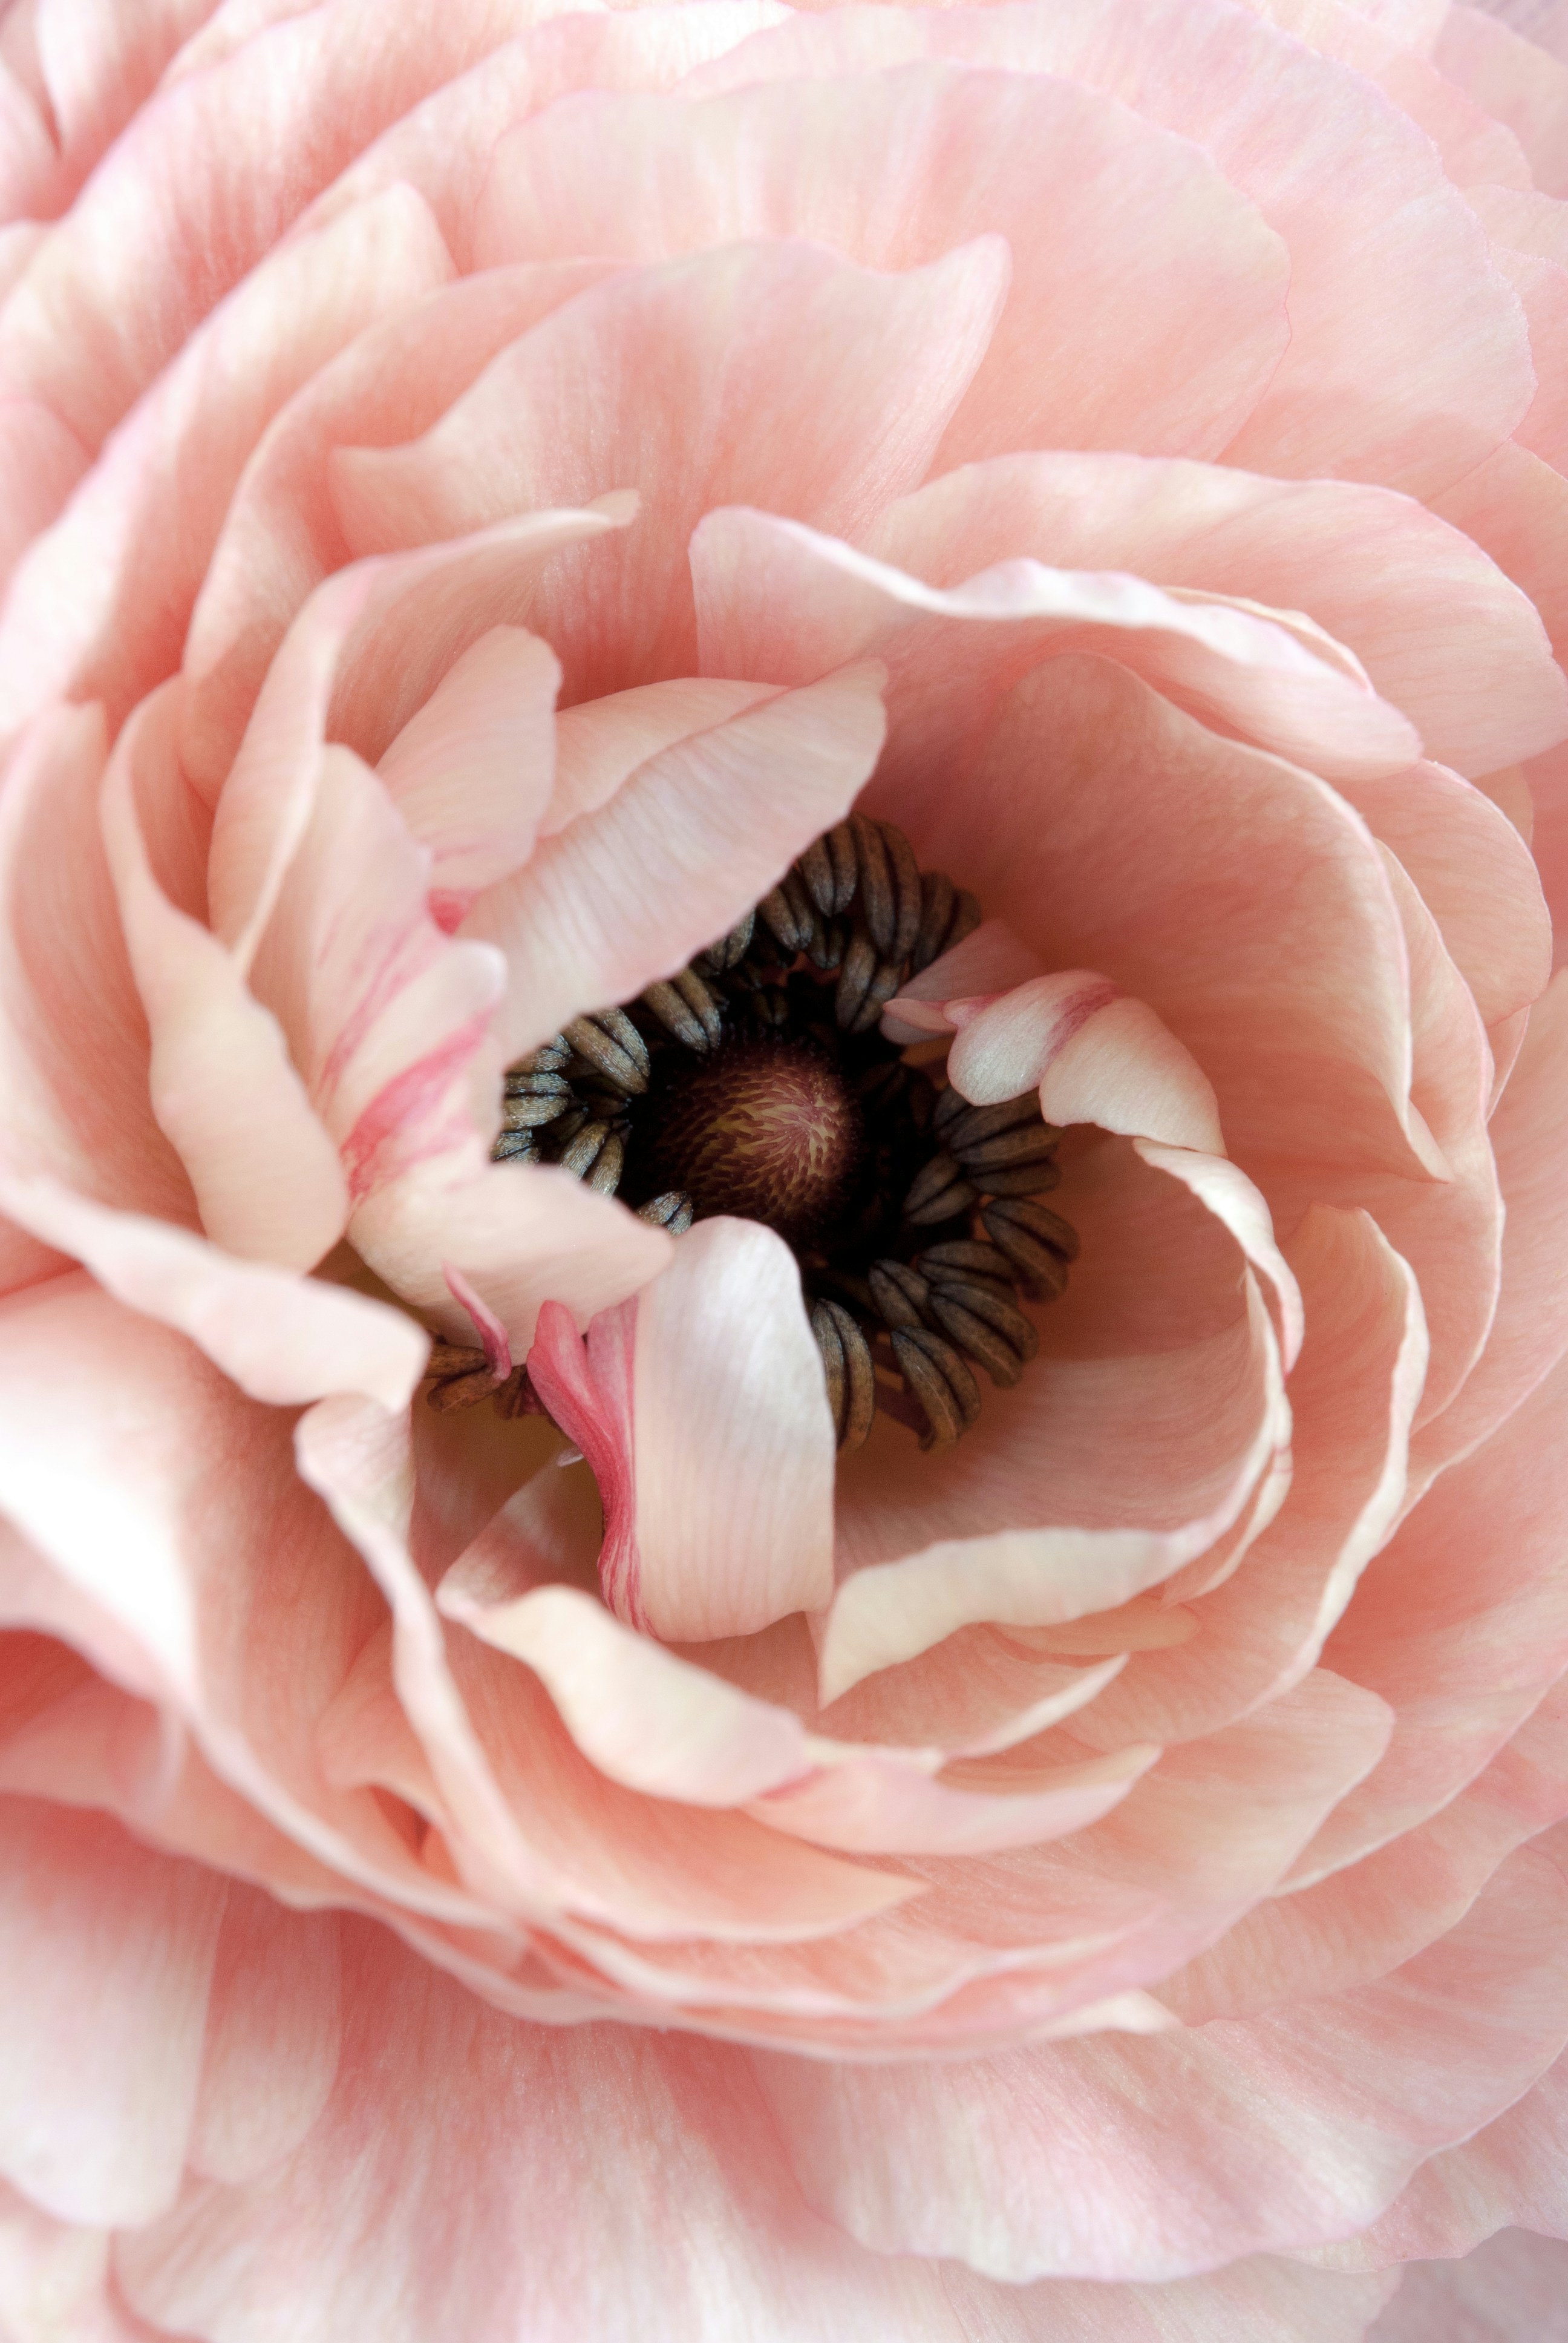 This photograph is one of my favourite flower close ups. It feels really feminine. I love how softly the pink petals of this ranunculus float about its dark centre.